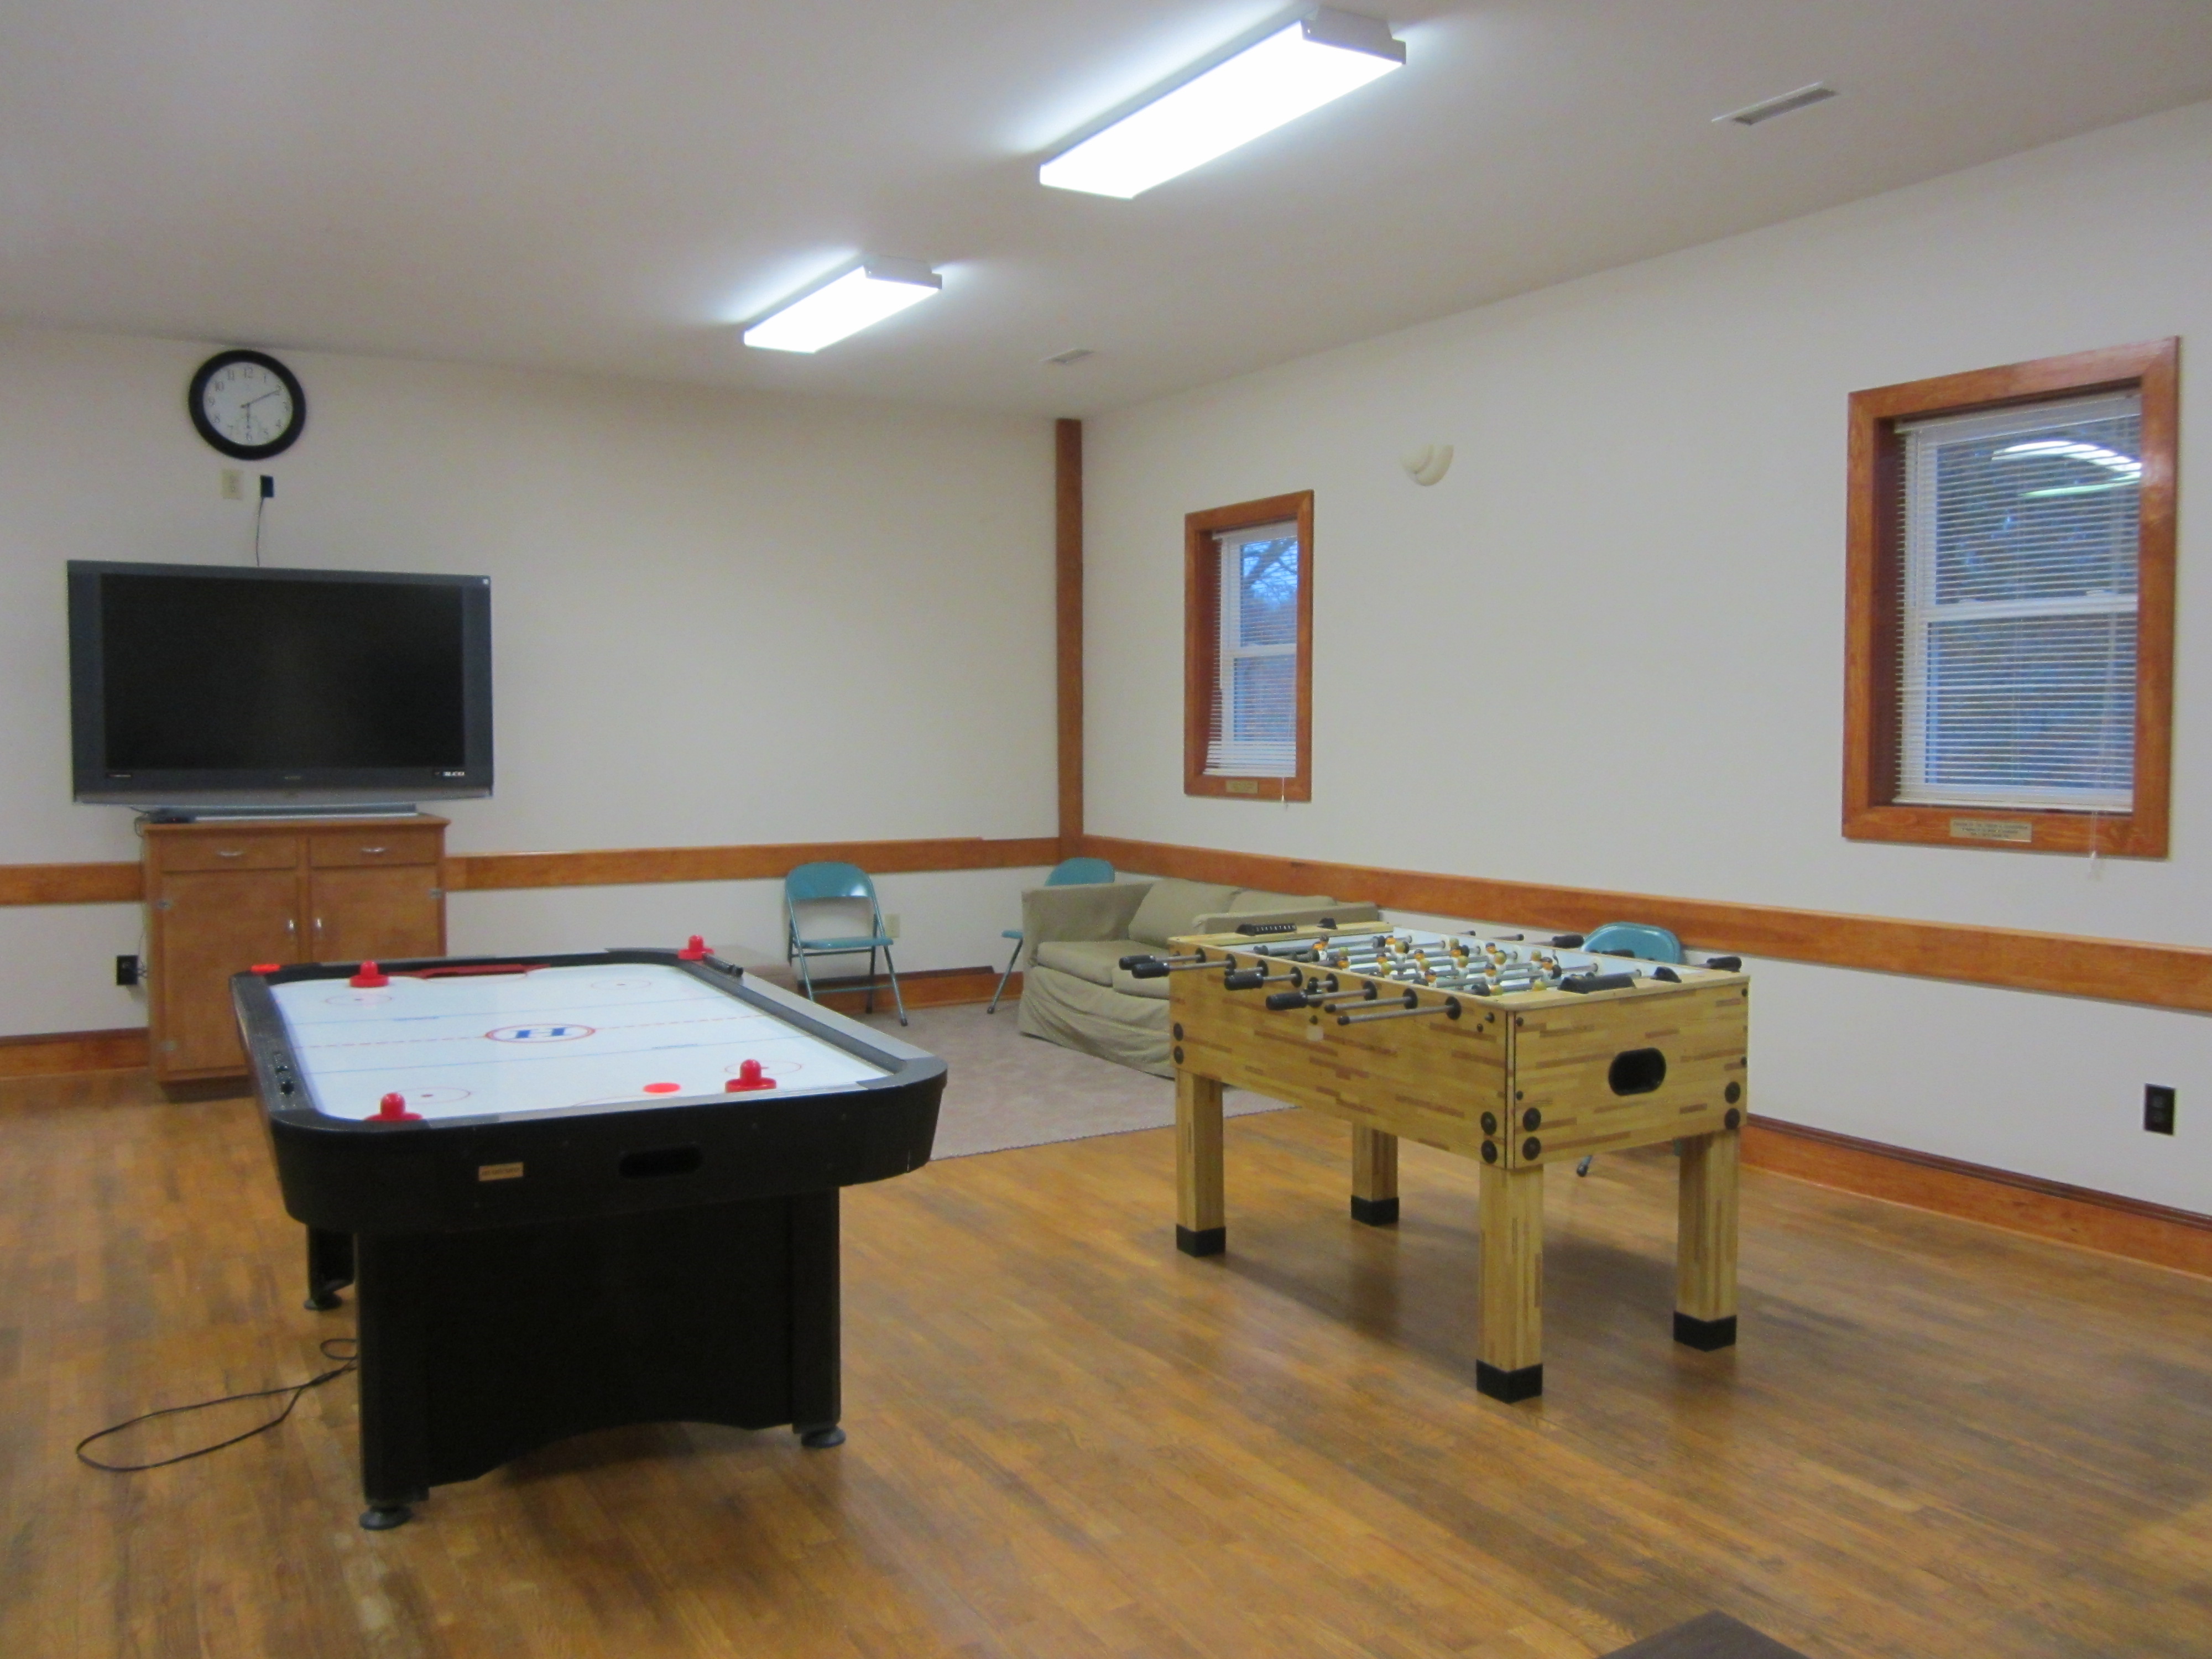 Game Room - 2nd floor; with TV